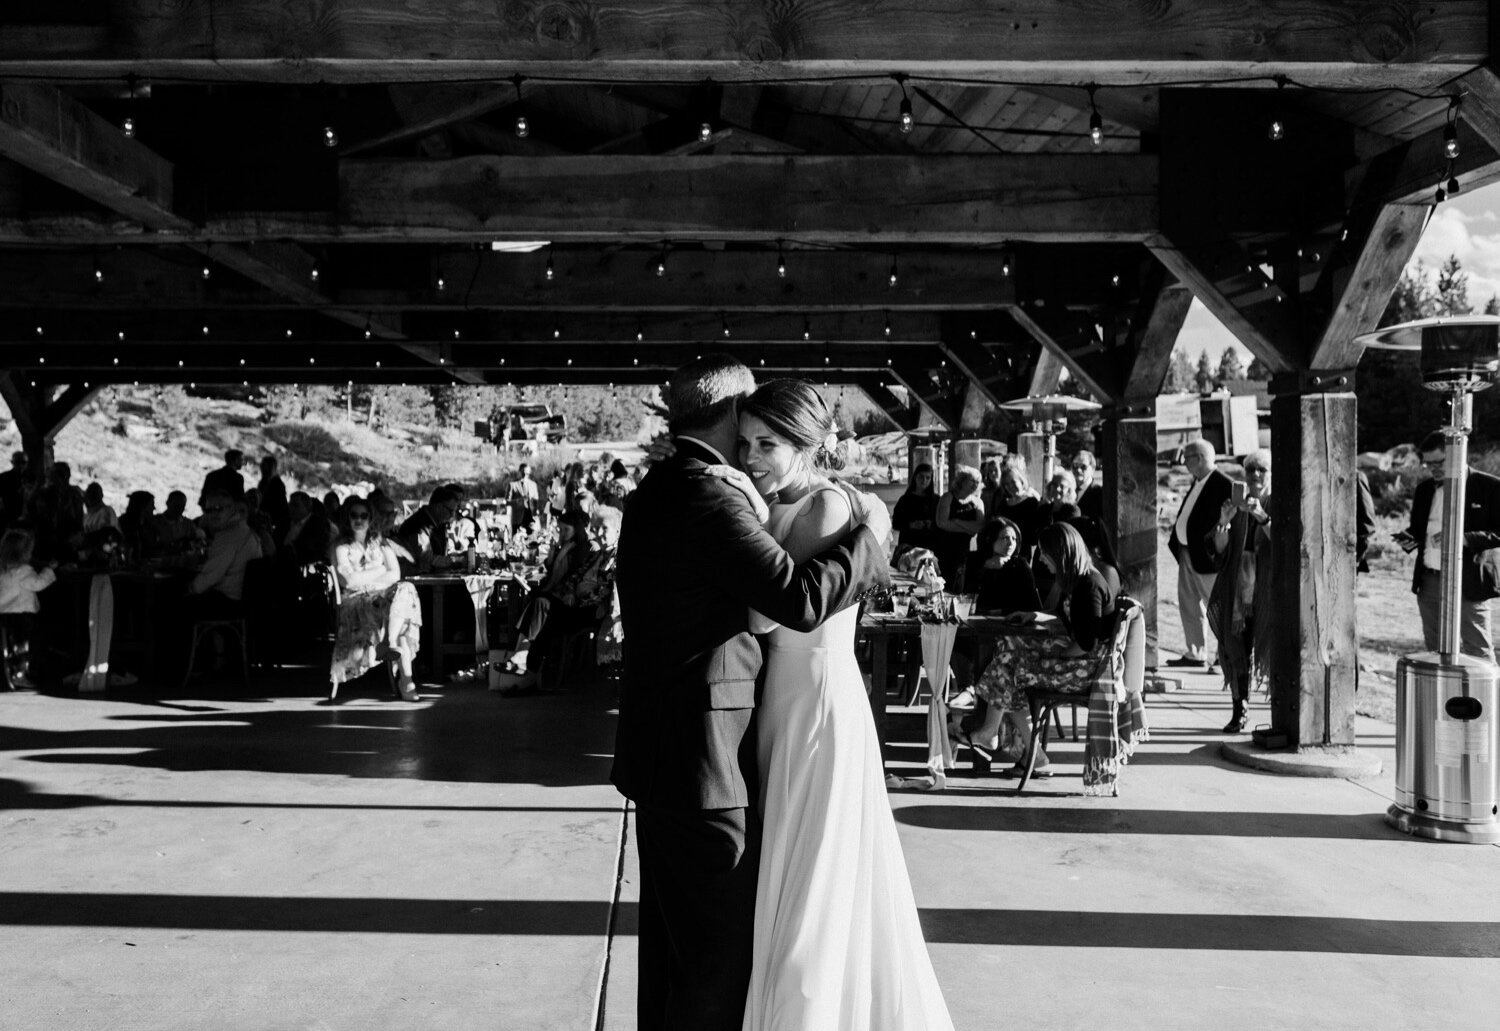  Father daughter dance, Wedding Reception, Windy Point Campground Wedding Colorado, Dillon Colorado Wedding, Colorado mountain wedding, Dillon Colorado Wedding Photographer, Colorado Wedding Photographer, Colorado mountain wedding venues, Colorado ca